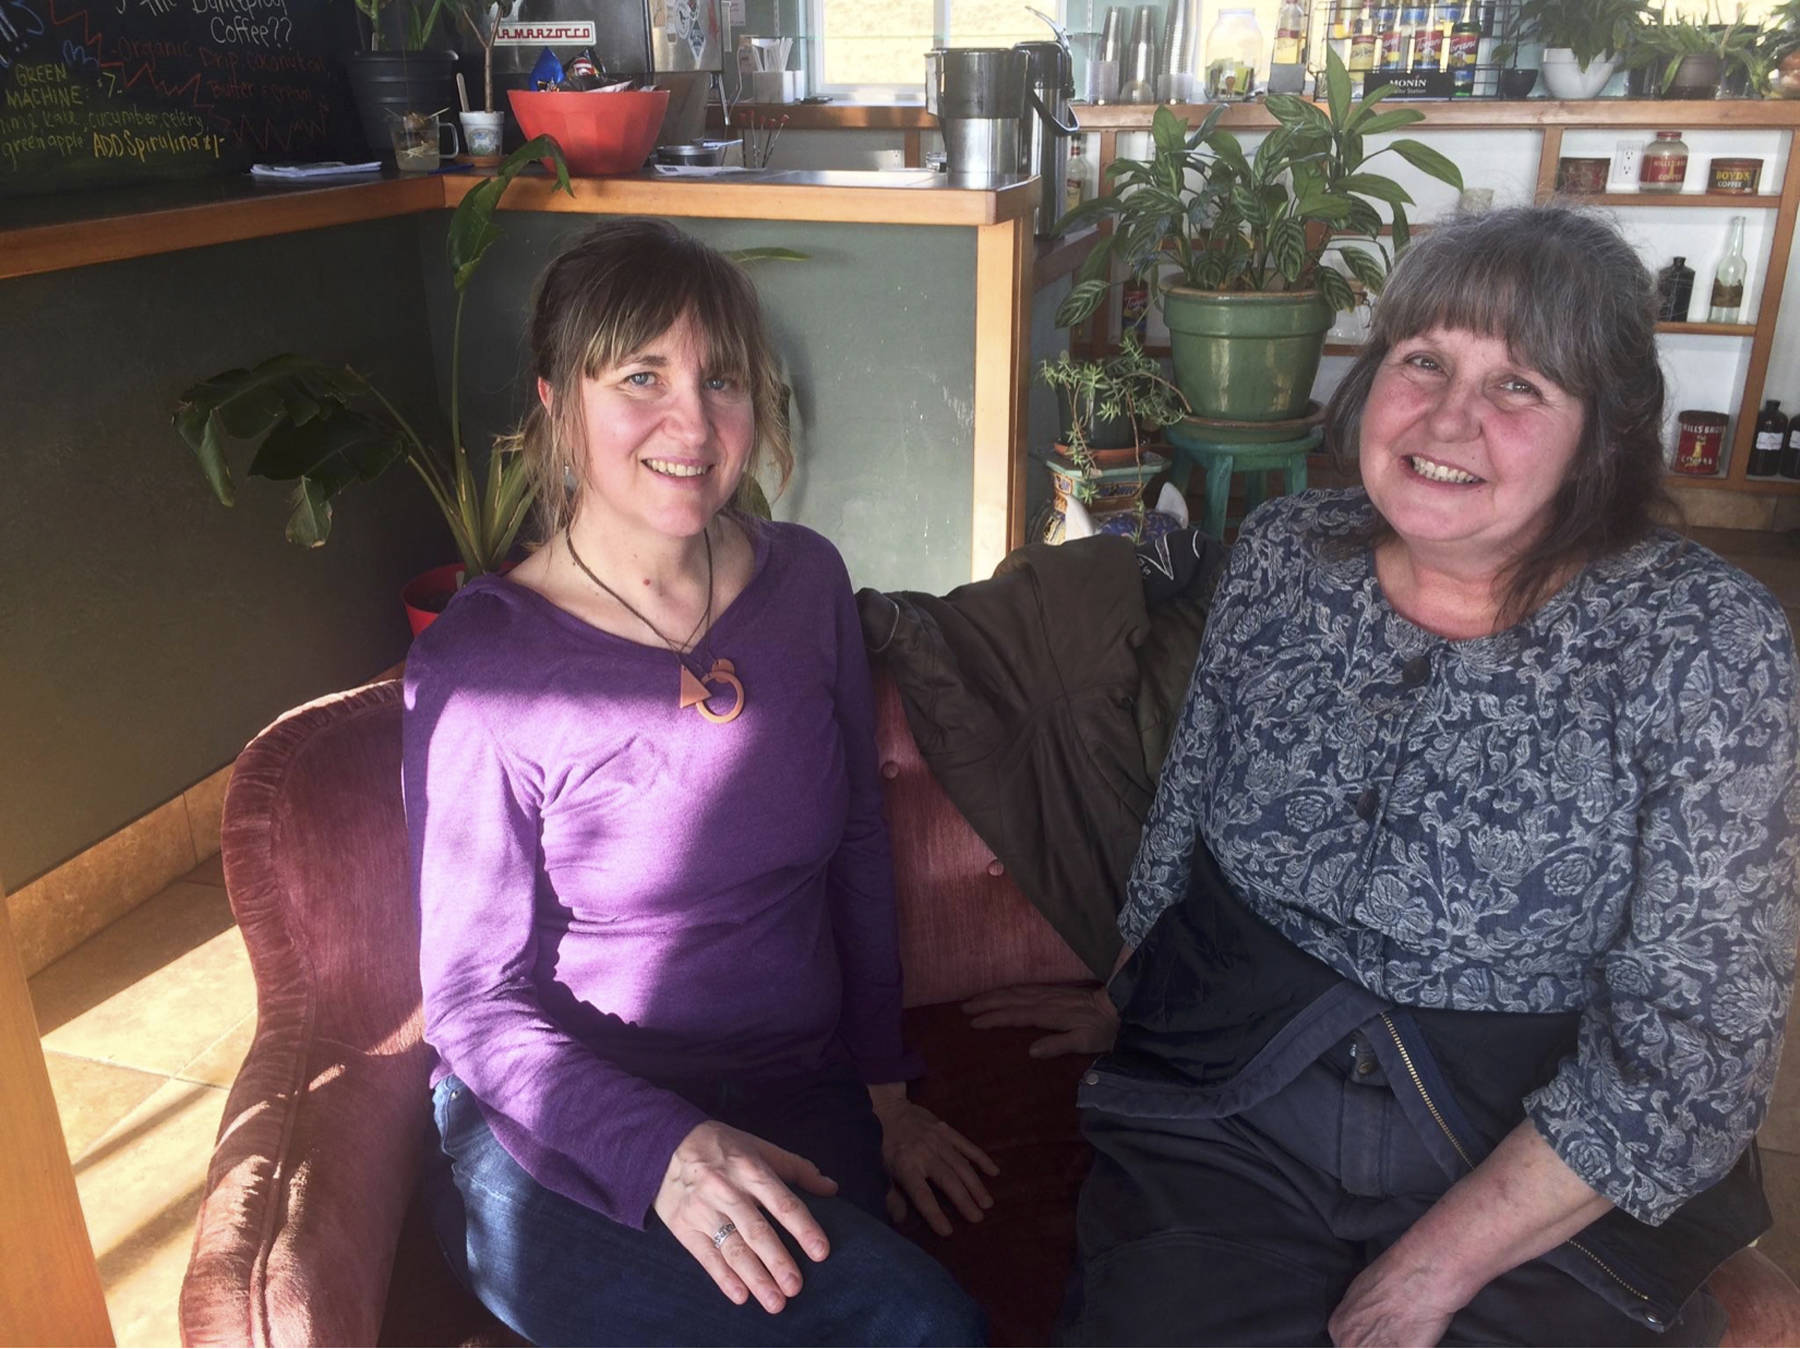 Shawn Zuke (left) and Anita Christie (right) sit on a couch during a planning session for the Homer ubuntu group at Stowaway Coffee on East End Road in Homer, Alaska. (Photo by Jennifer Tarnaki)